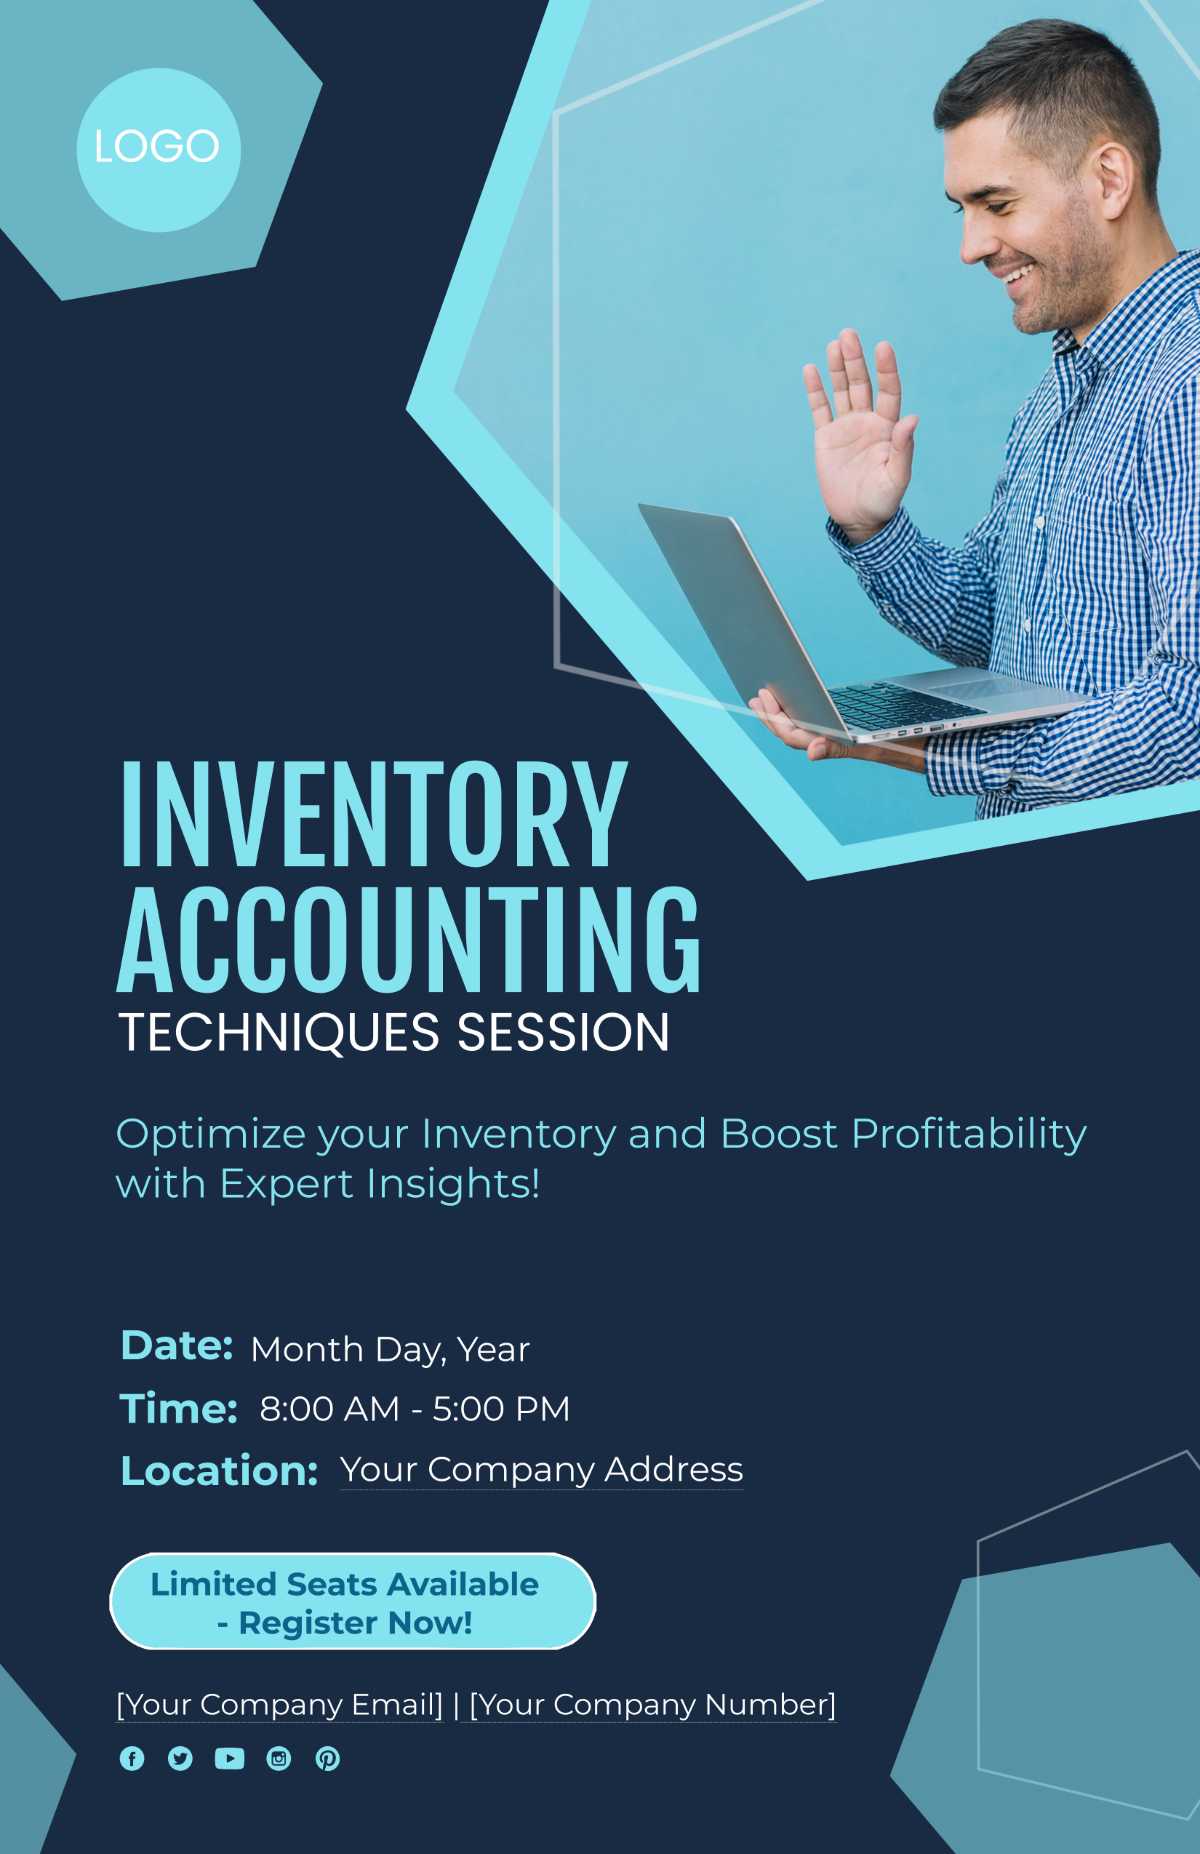 Free Inventory Accounting Techniques Session Poster Template